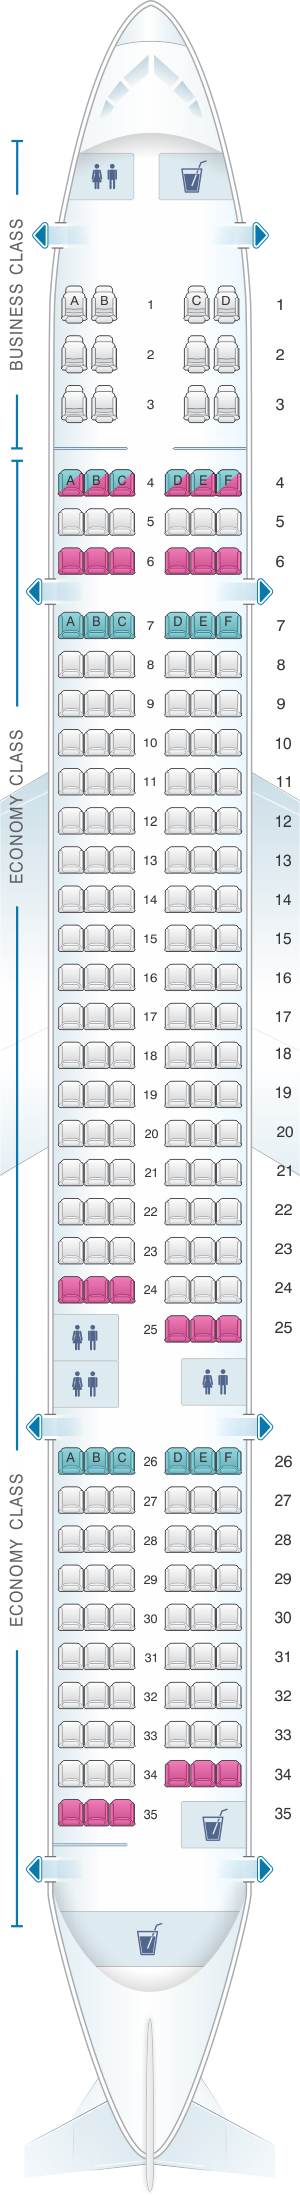 Seat map for Fly Jamaica Boeing B757-200